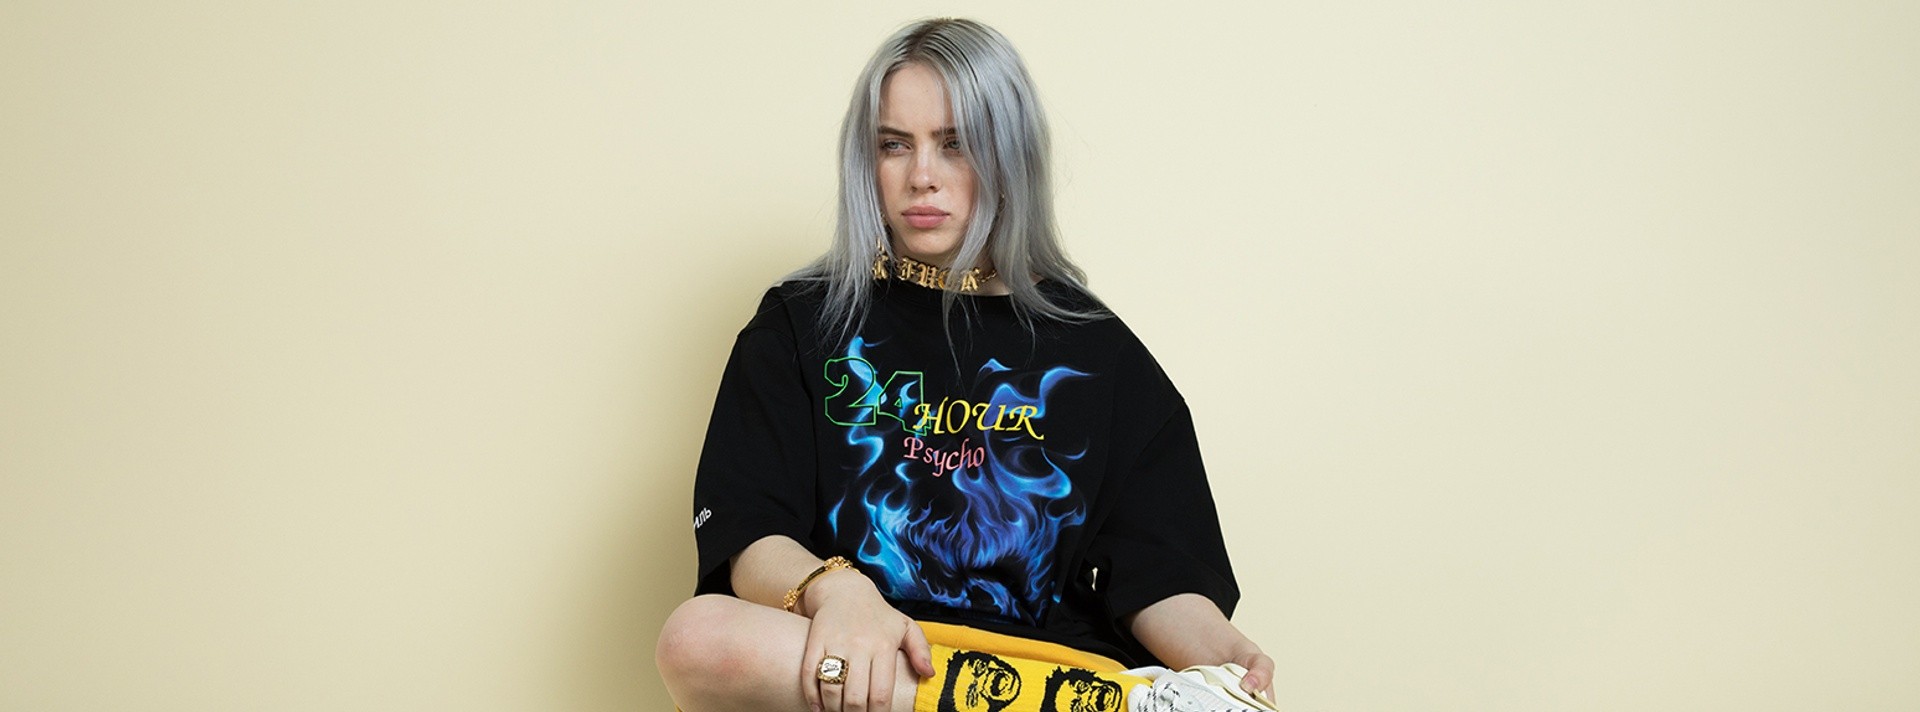 BILLIE EILISH announces Asia 2020 tour – shows in Taipei, Jakarta, Manila and more confirmed